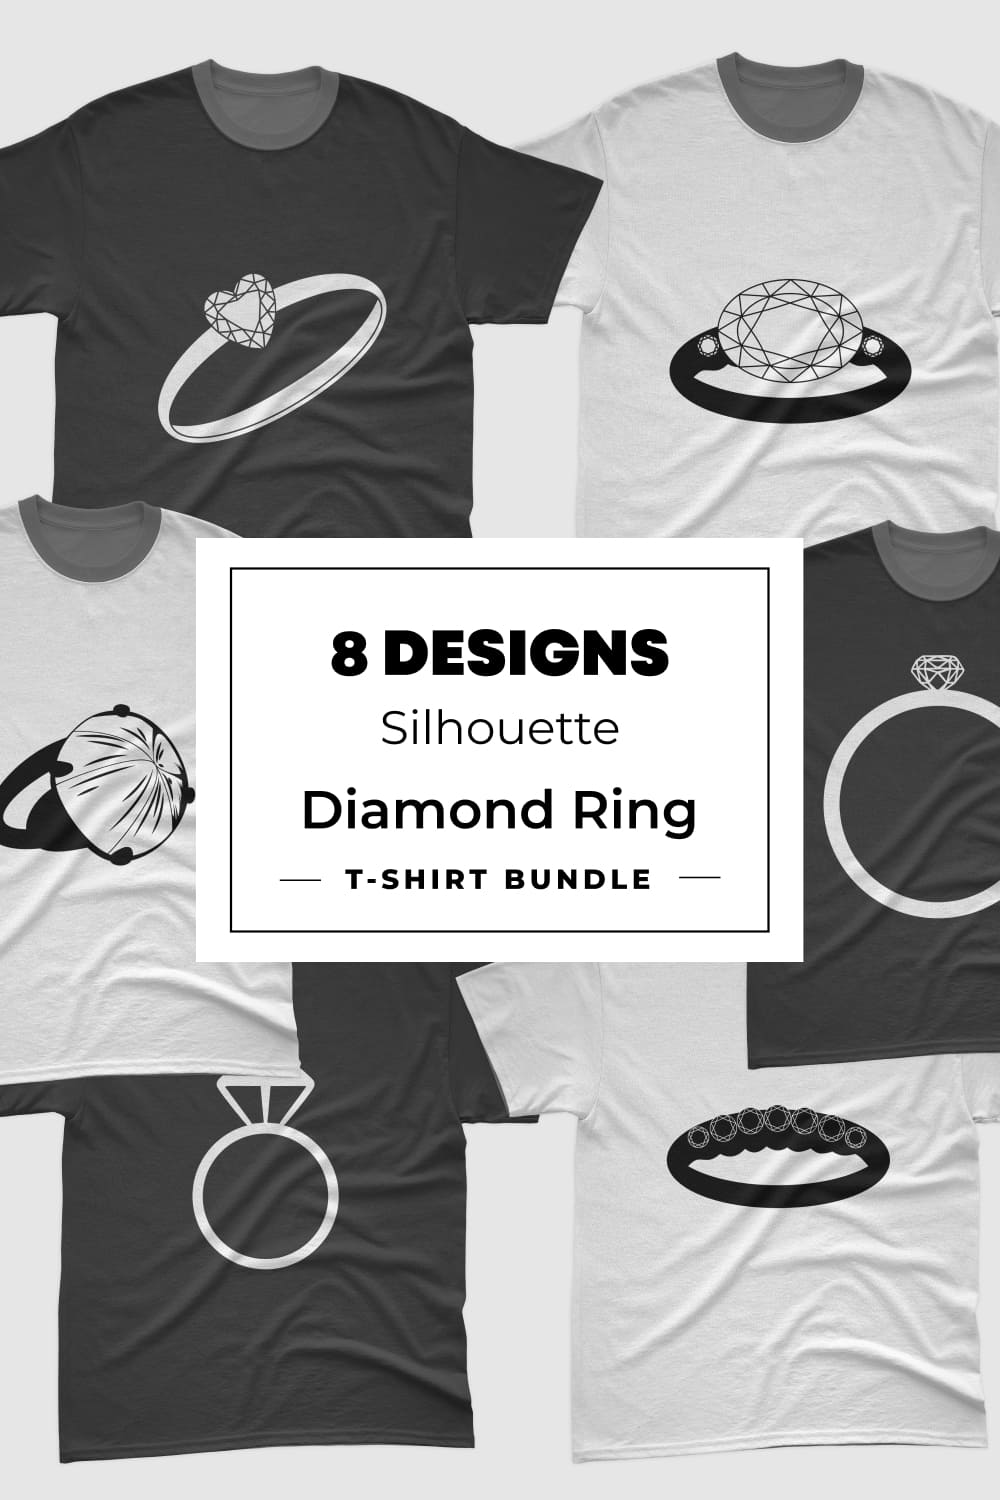 Set of t-shirt images with amazing diamond ring silhouette prints.